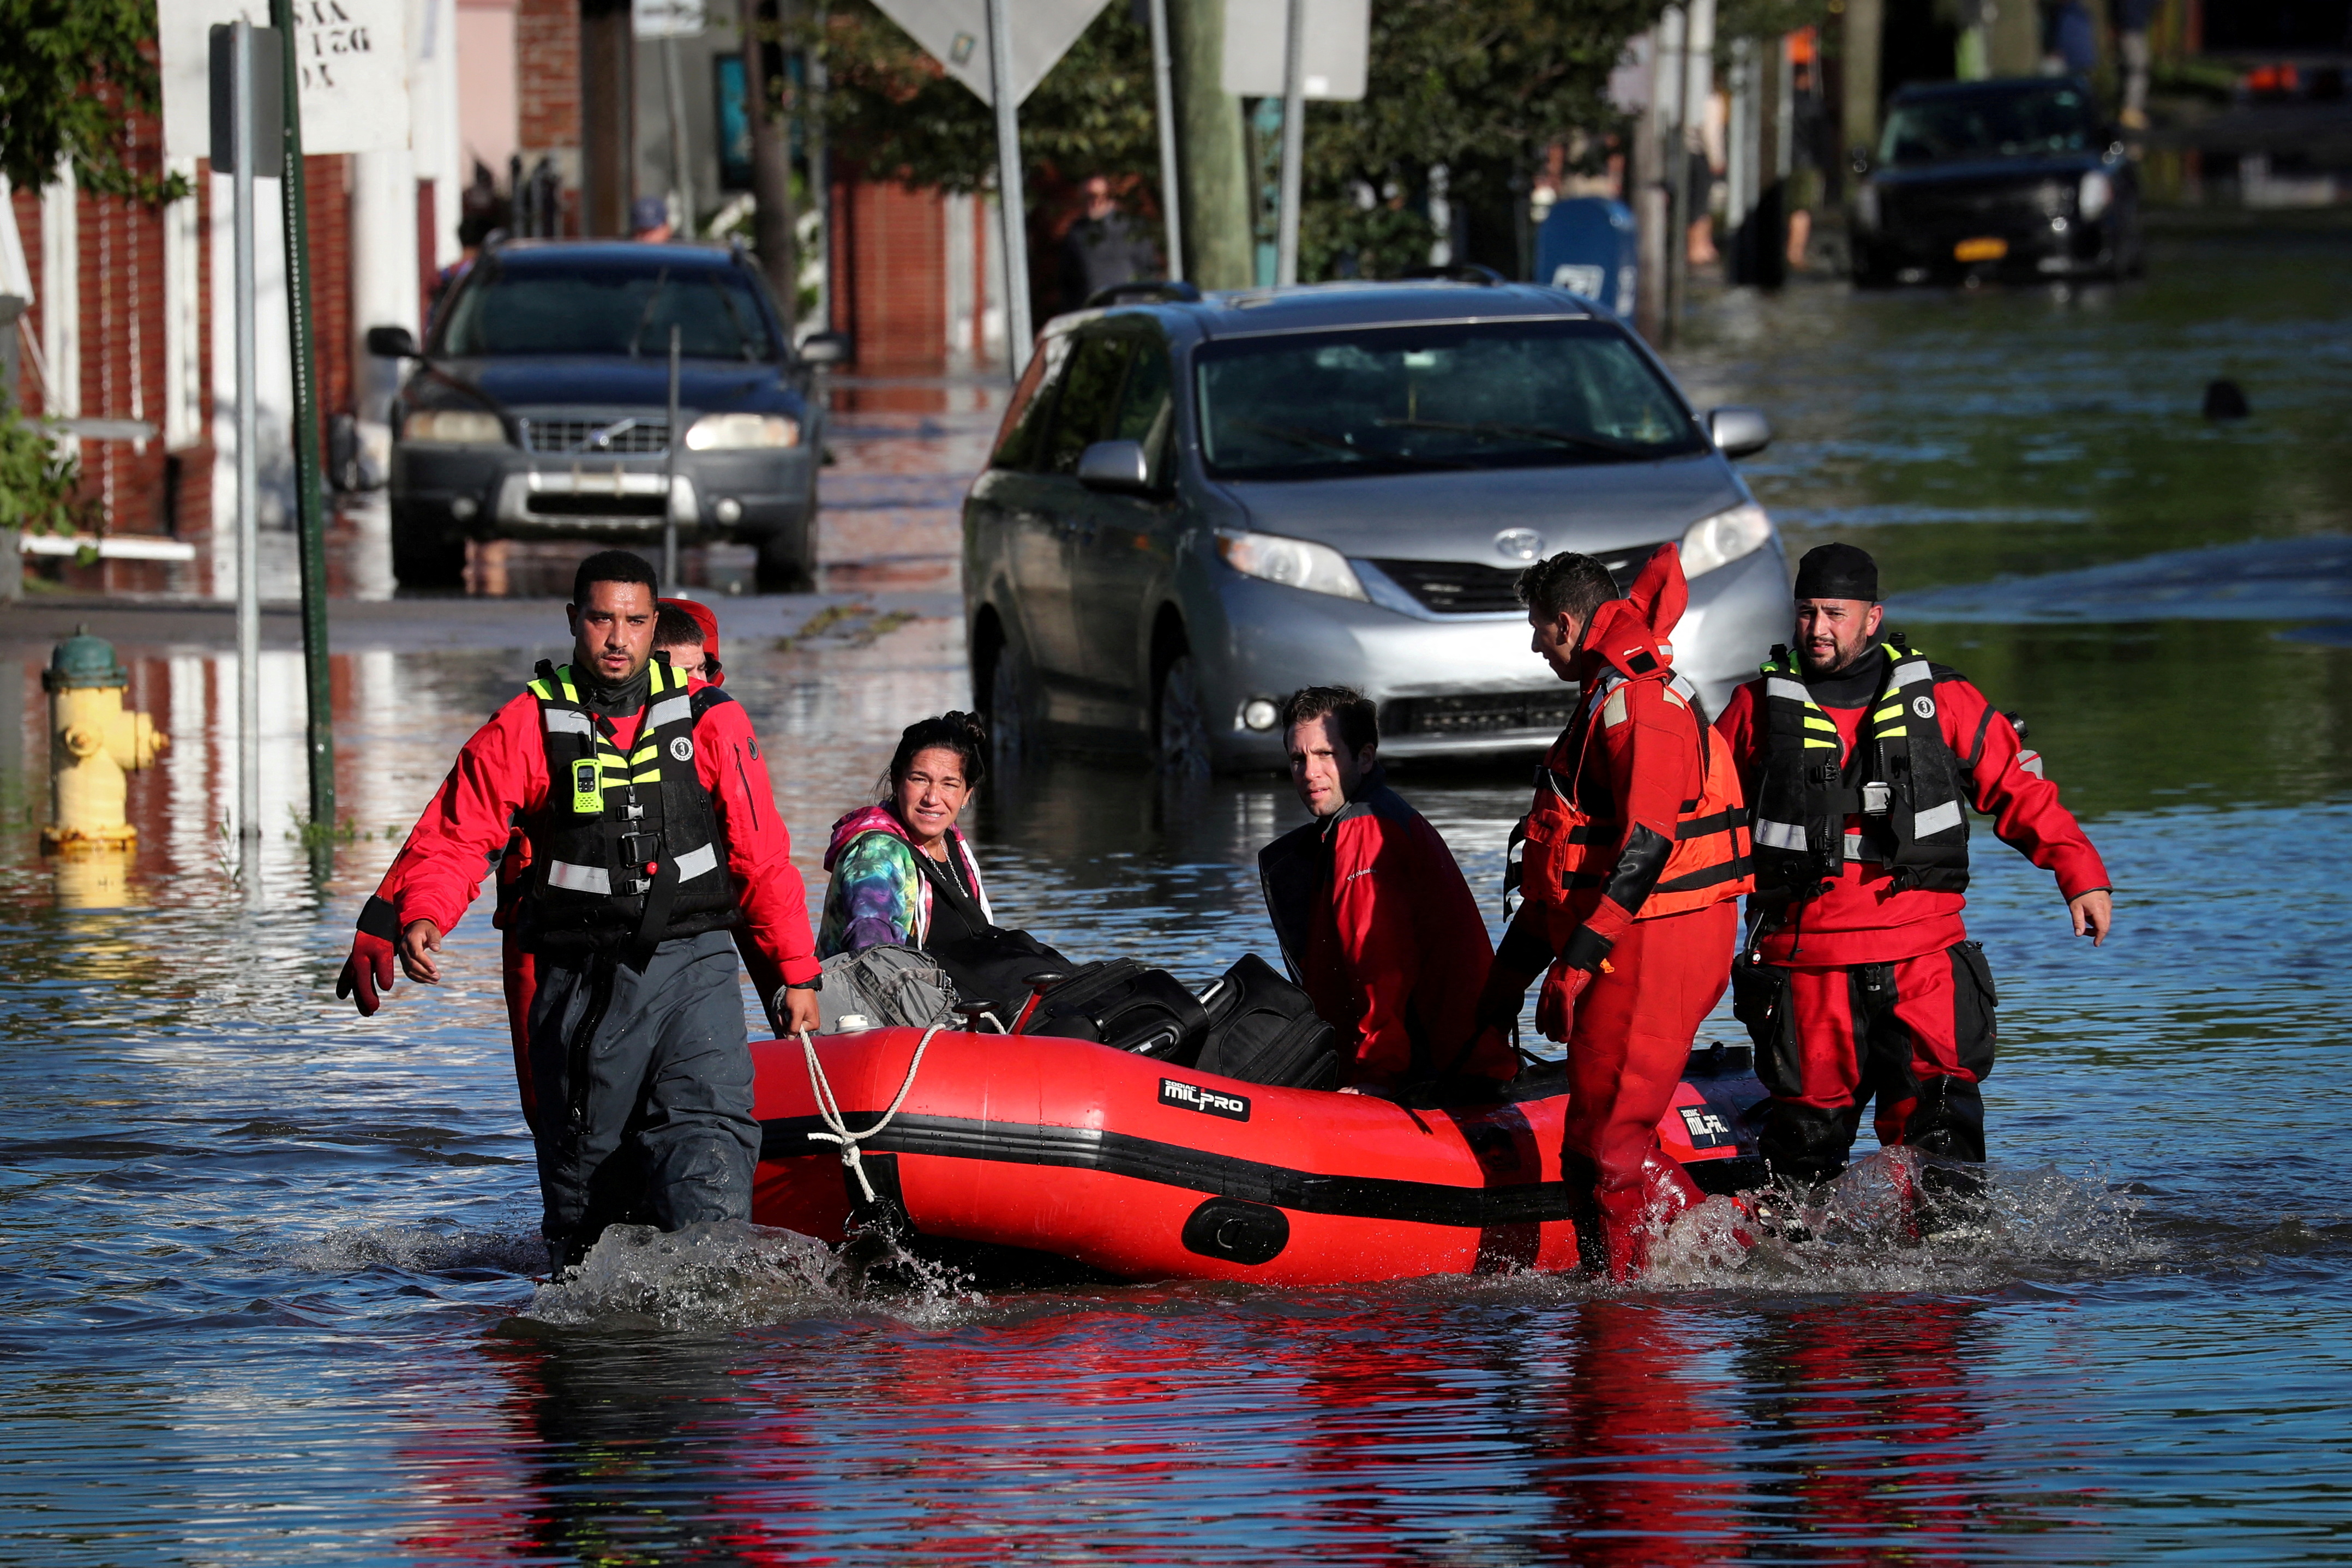 First responders pull residents in a boat following flooding in Mamaroneck, New York